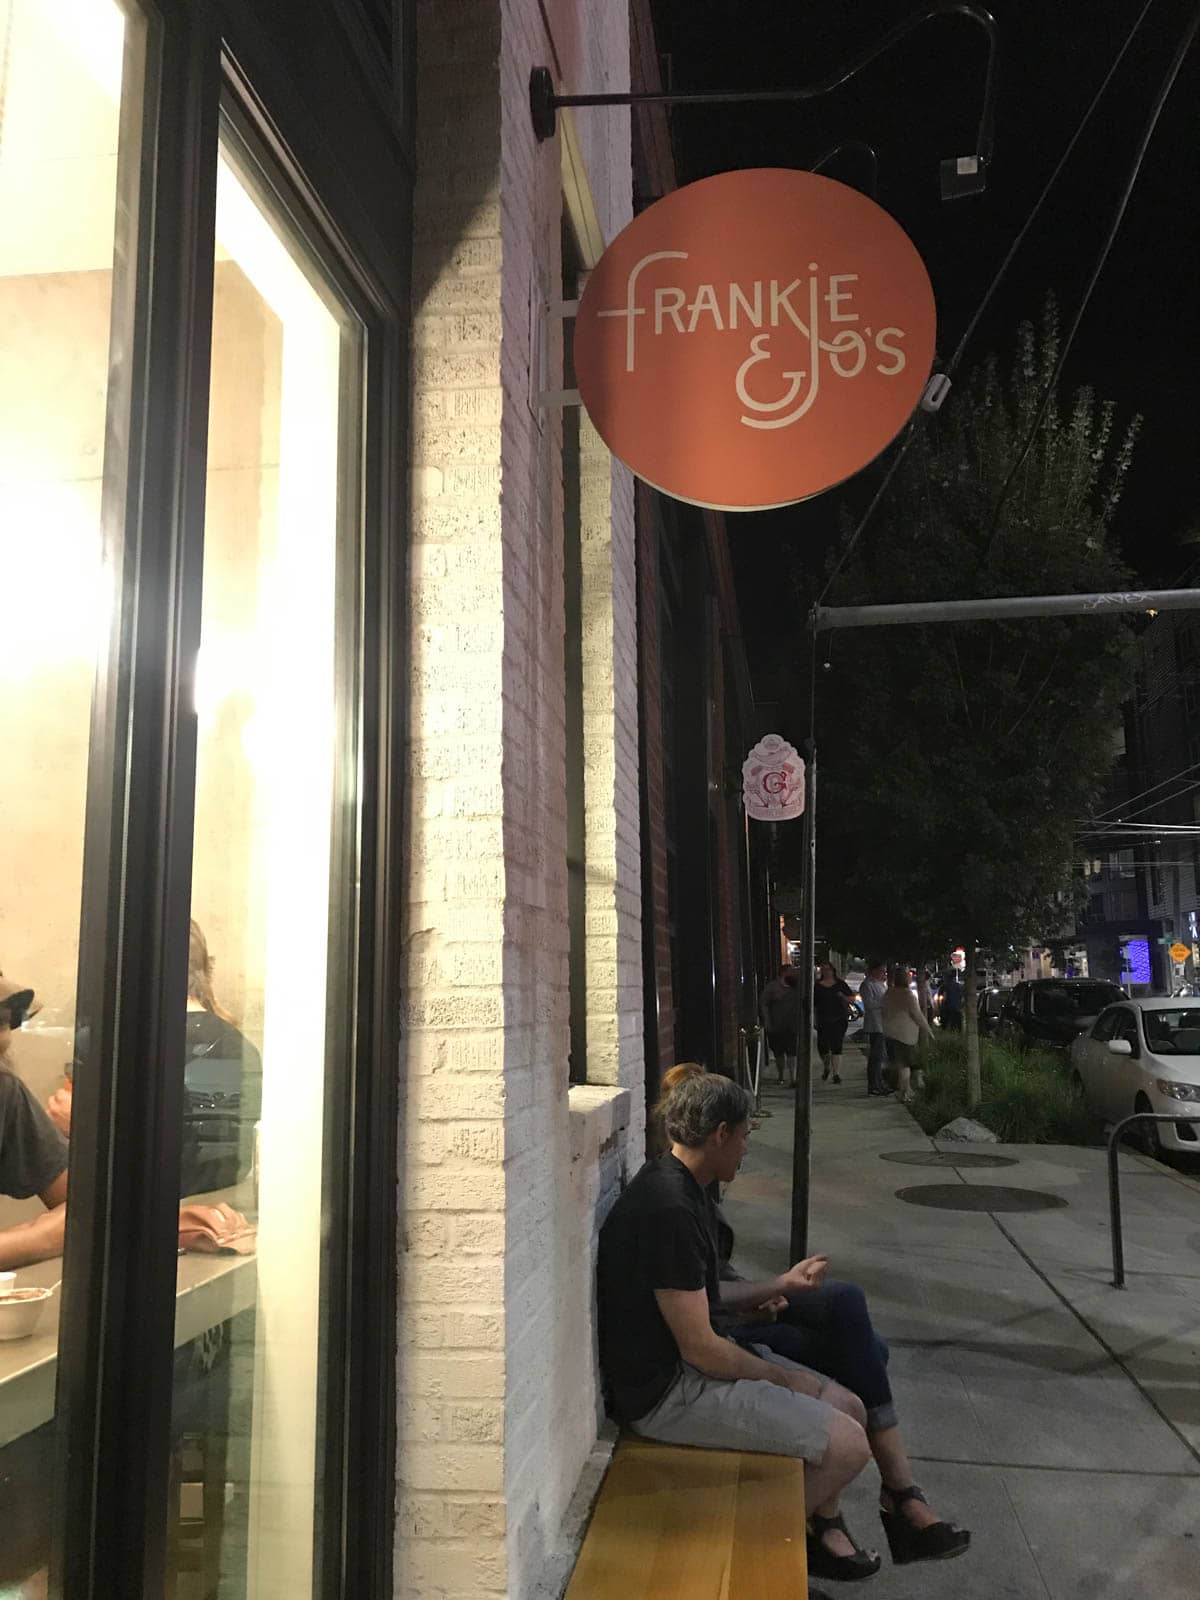 A side view of the outside of an ice cream parlour with a round pink sign reading “Frankie & Jo’s”. Two people sit on a bench outside the parlour, and some people can be seen sitting inside though the glass window.